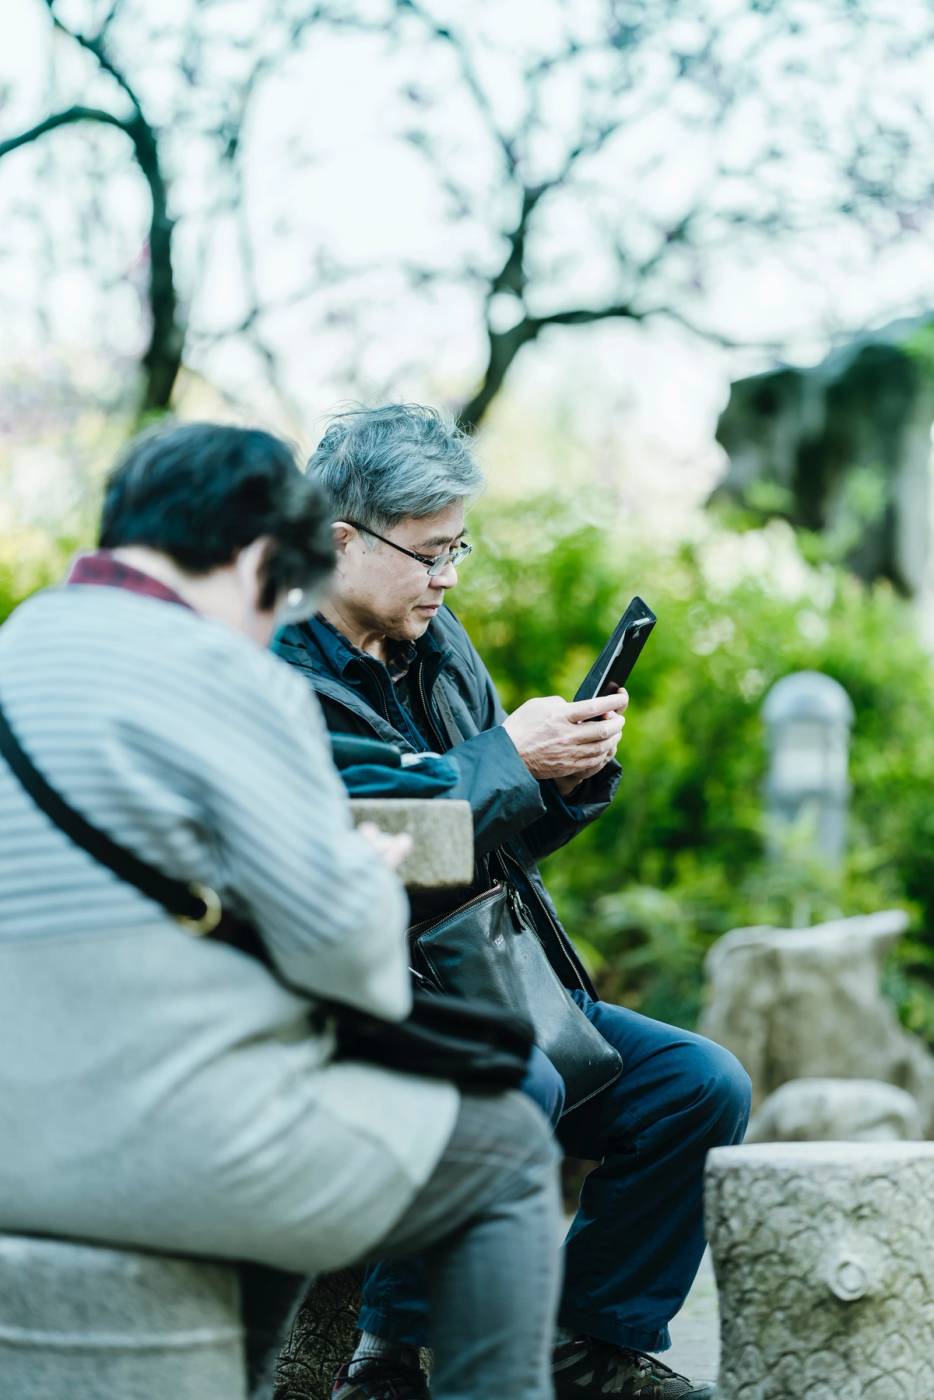 Why older people in China are hooked on social media